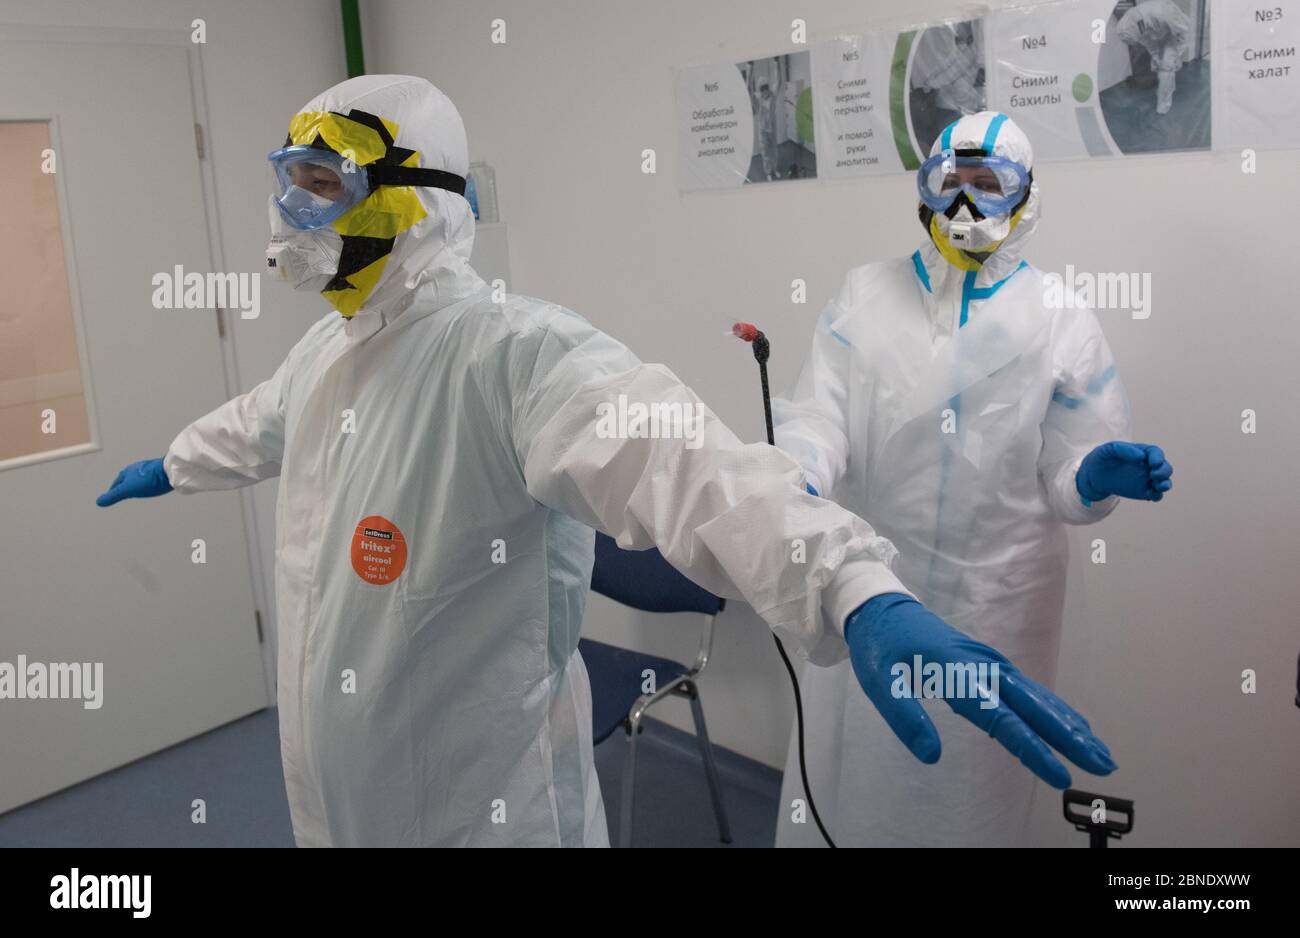 (200514) -- MOSCOW, May 14, 2020 (Xinhua) -- A medical worker wearing personal protective equipment (PPE) disinfects her colleague at the National Medical Research Center for Endocrinology where patients suffering from COVID-19 are treated in Moscow, Russia, on May 14, 2020. Russia has confirmed 9,974 new COVID-19 cases in the past 24 hours, raising its total number of infections to 252,245, its coronavirus response center said in a statement Thursday. Global confirmed COVID-19 cases topped 4.4 million on Thursday, reaching 4,405,019 as of 12:32 p.m. (1632 GMT), according to the Center for Sys Stock Photo